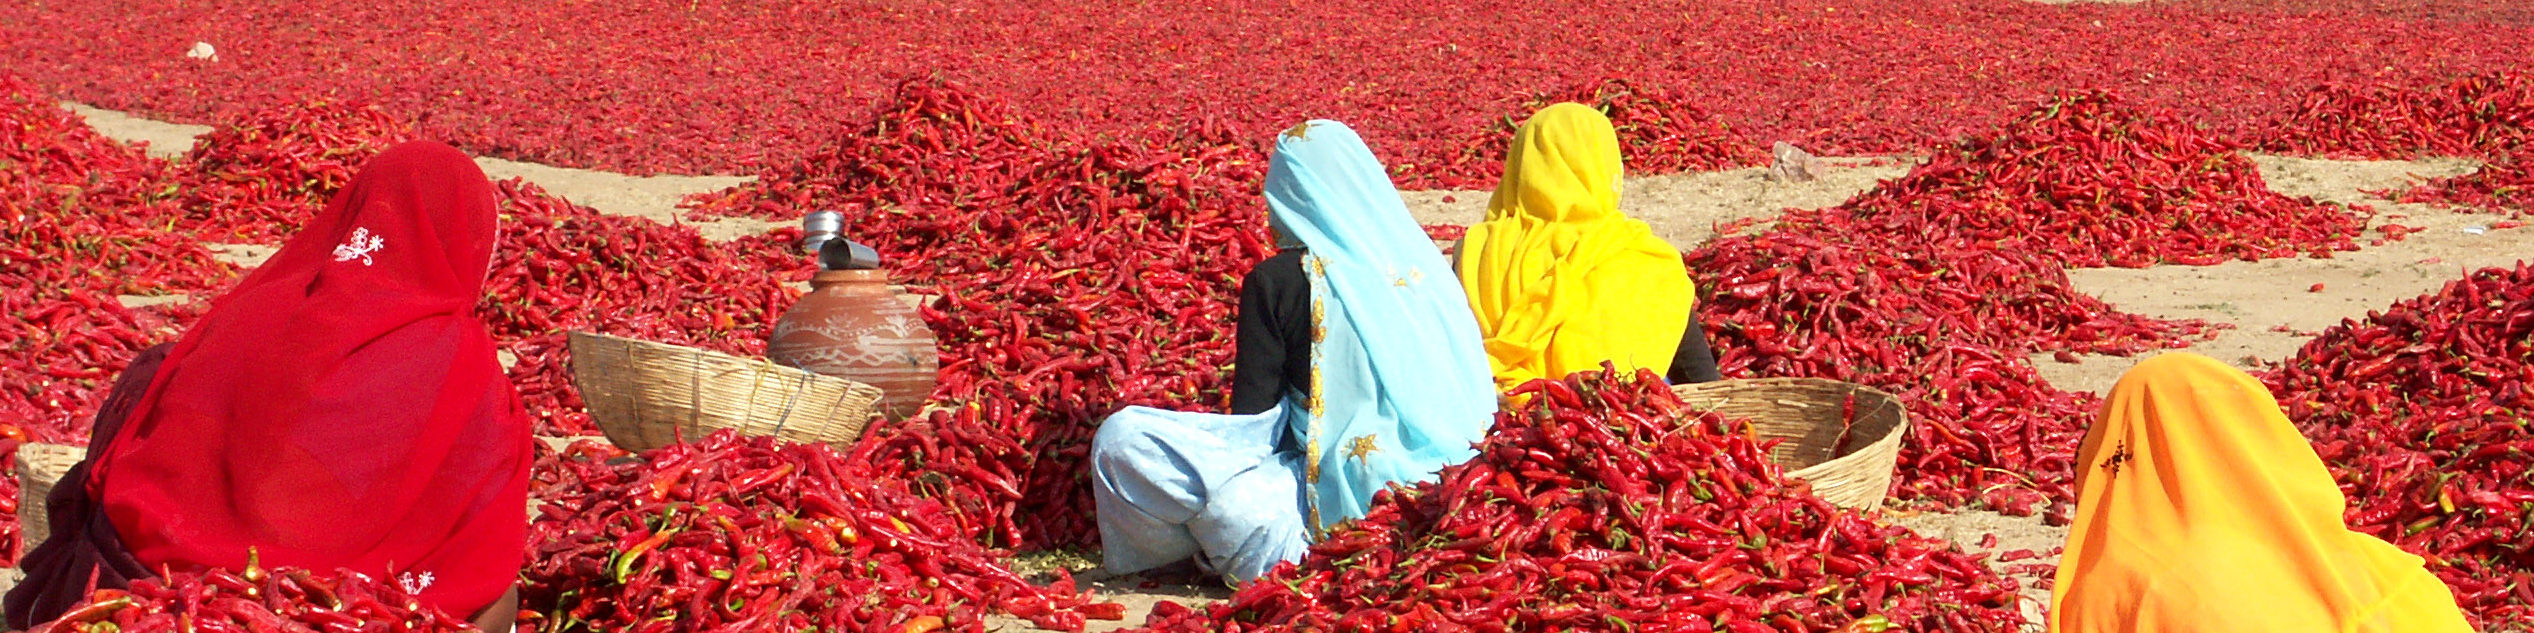 Four women inspecting red chili peppers in Rajasthan,India